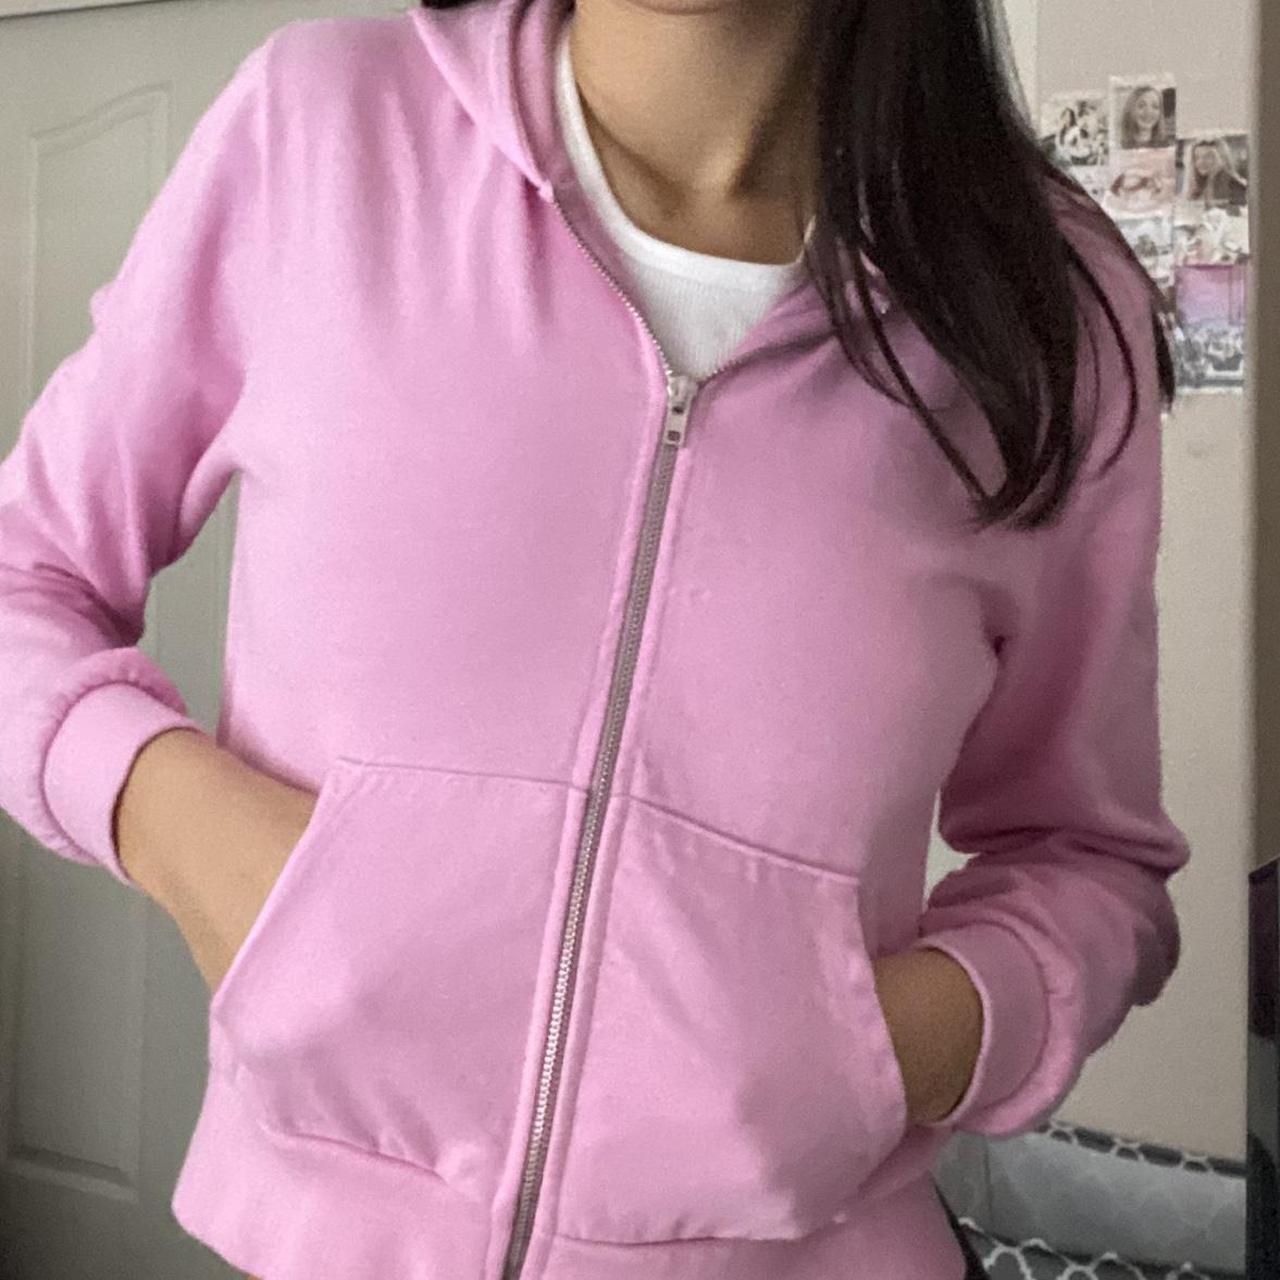 Brandy Melville Christy Hoodie Pink - $38 (20% Off Retail) - From